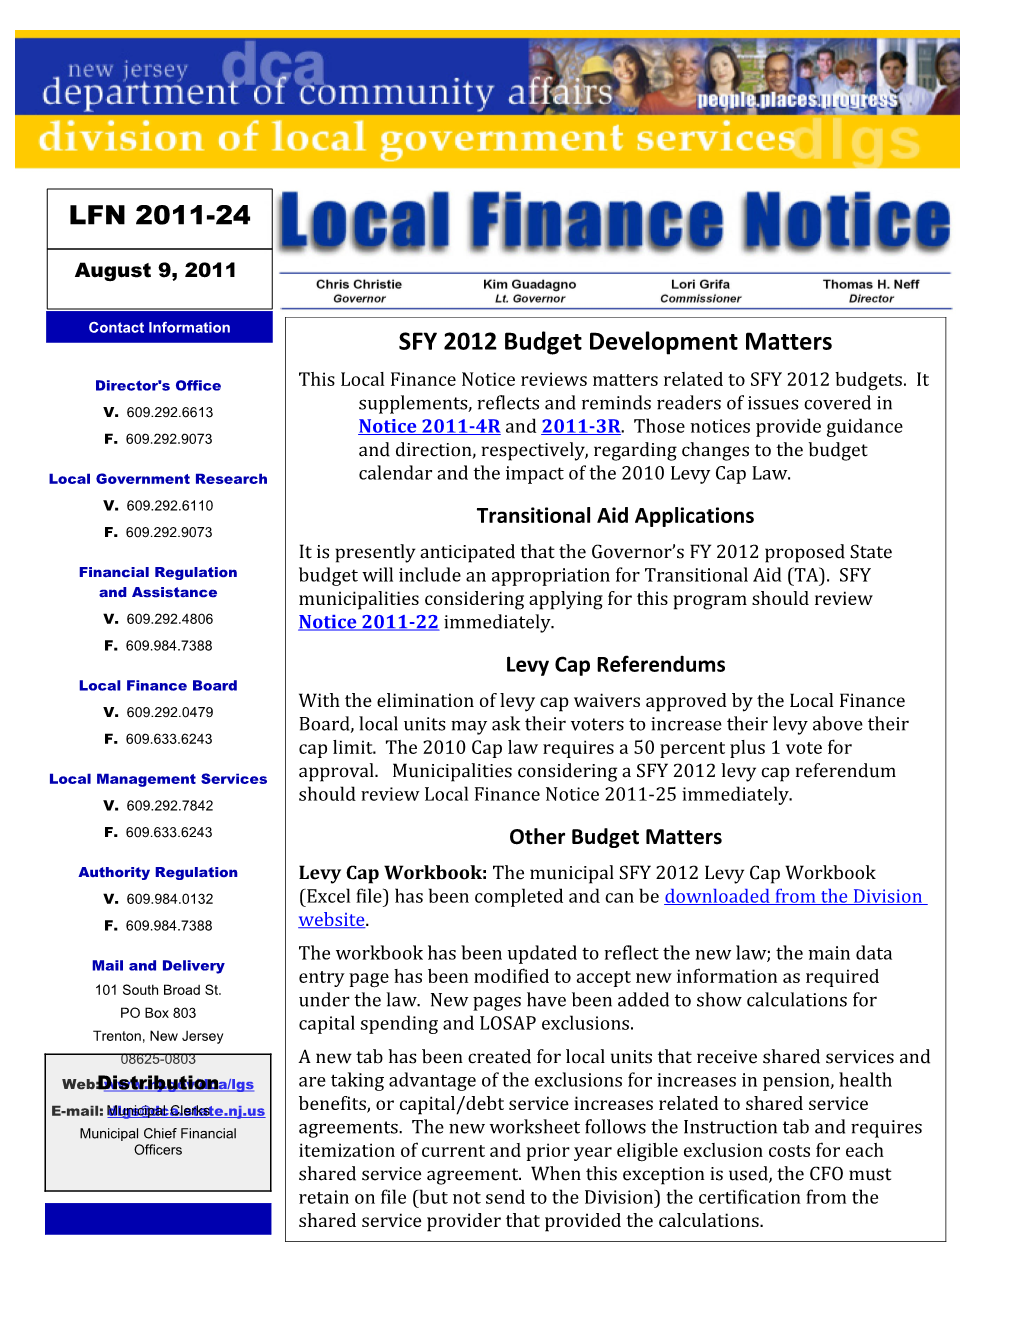 Local Finance Notice 2011-24 August 9, 2011 Page 5